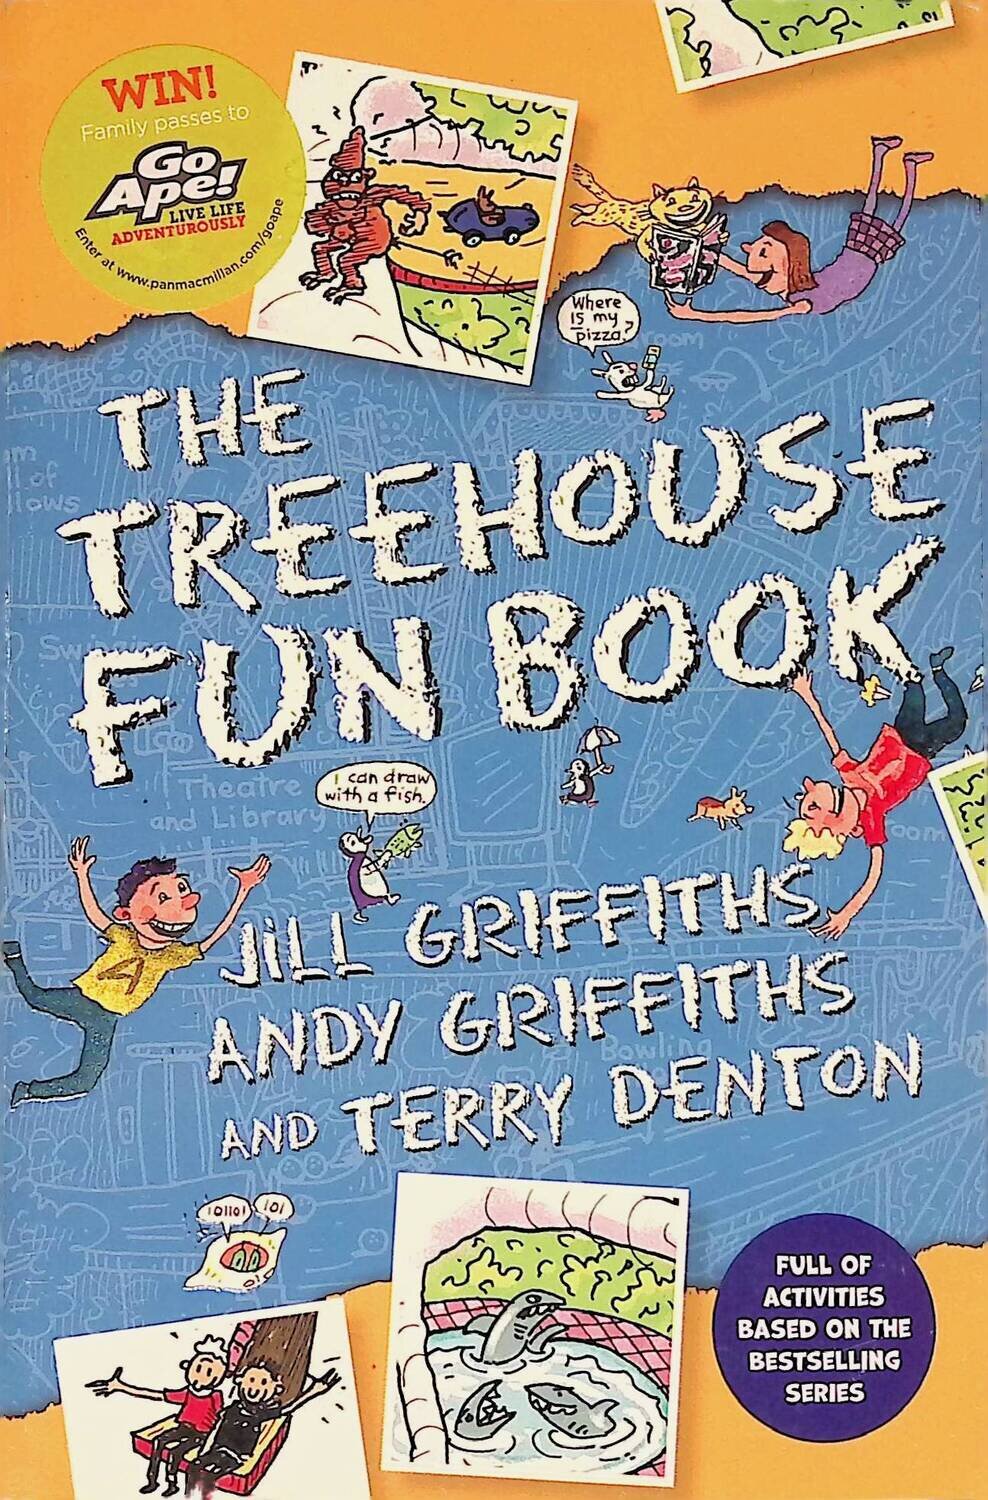 The Treehouse Fun Book; Griffiths Andy, Griffiths Jill, Denton Terry